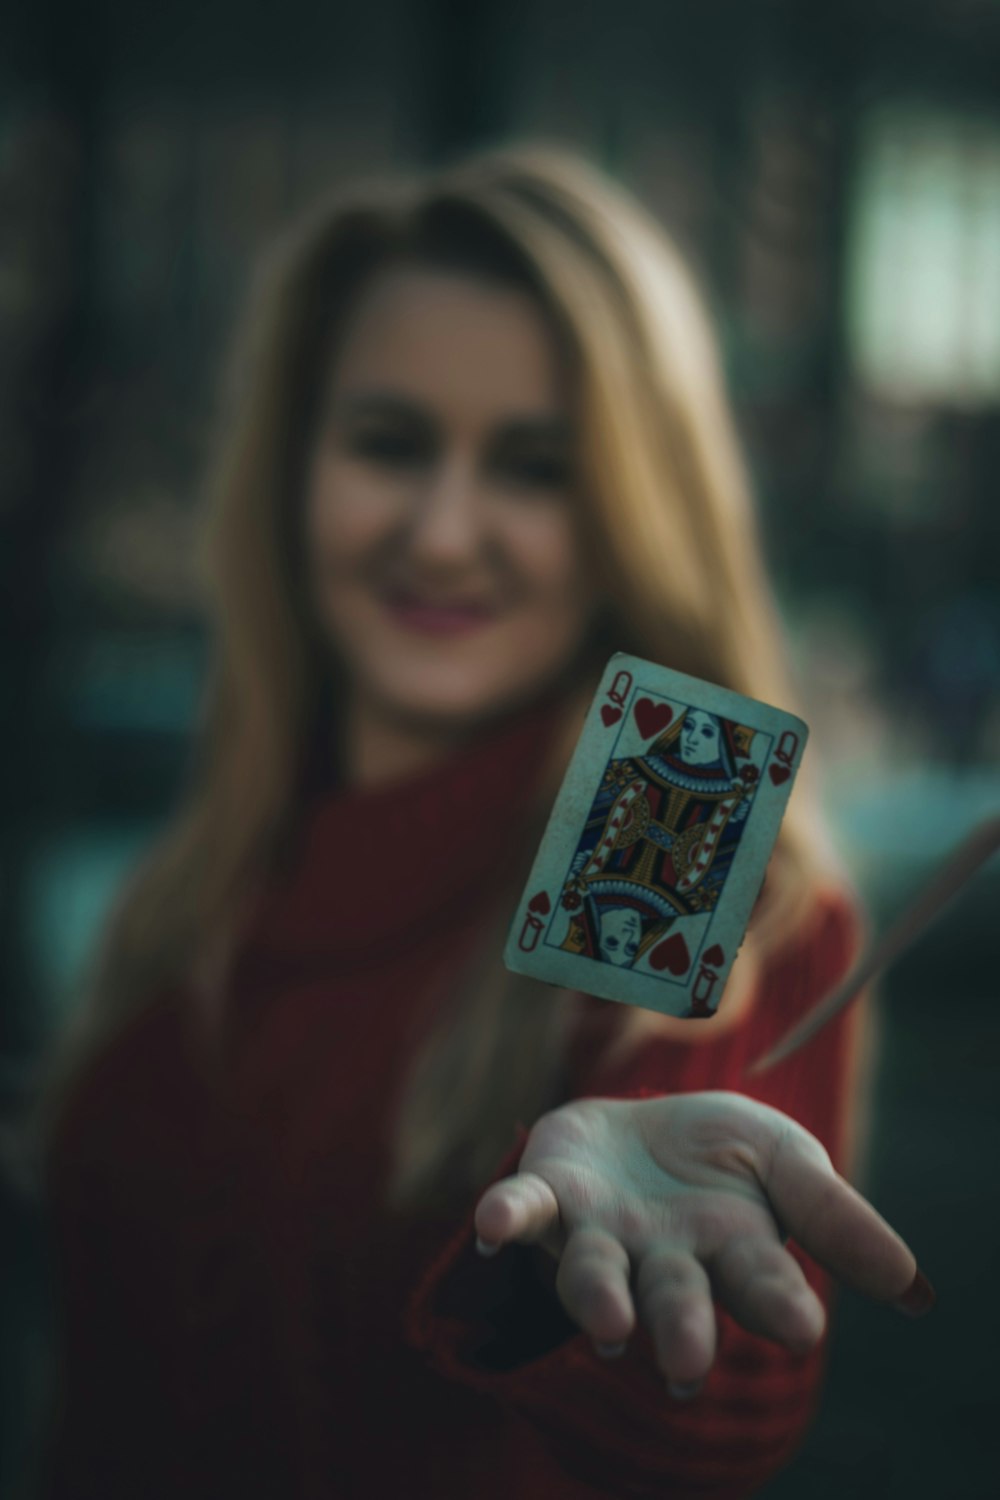 time lapse photo of queen of hearts playing card near woman's palm